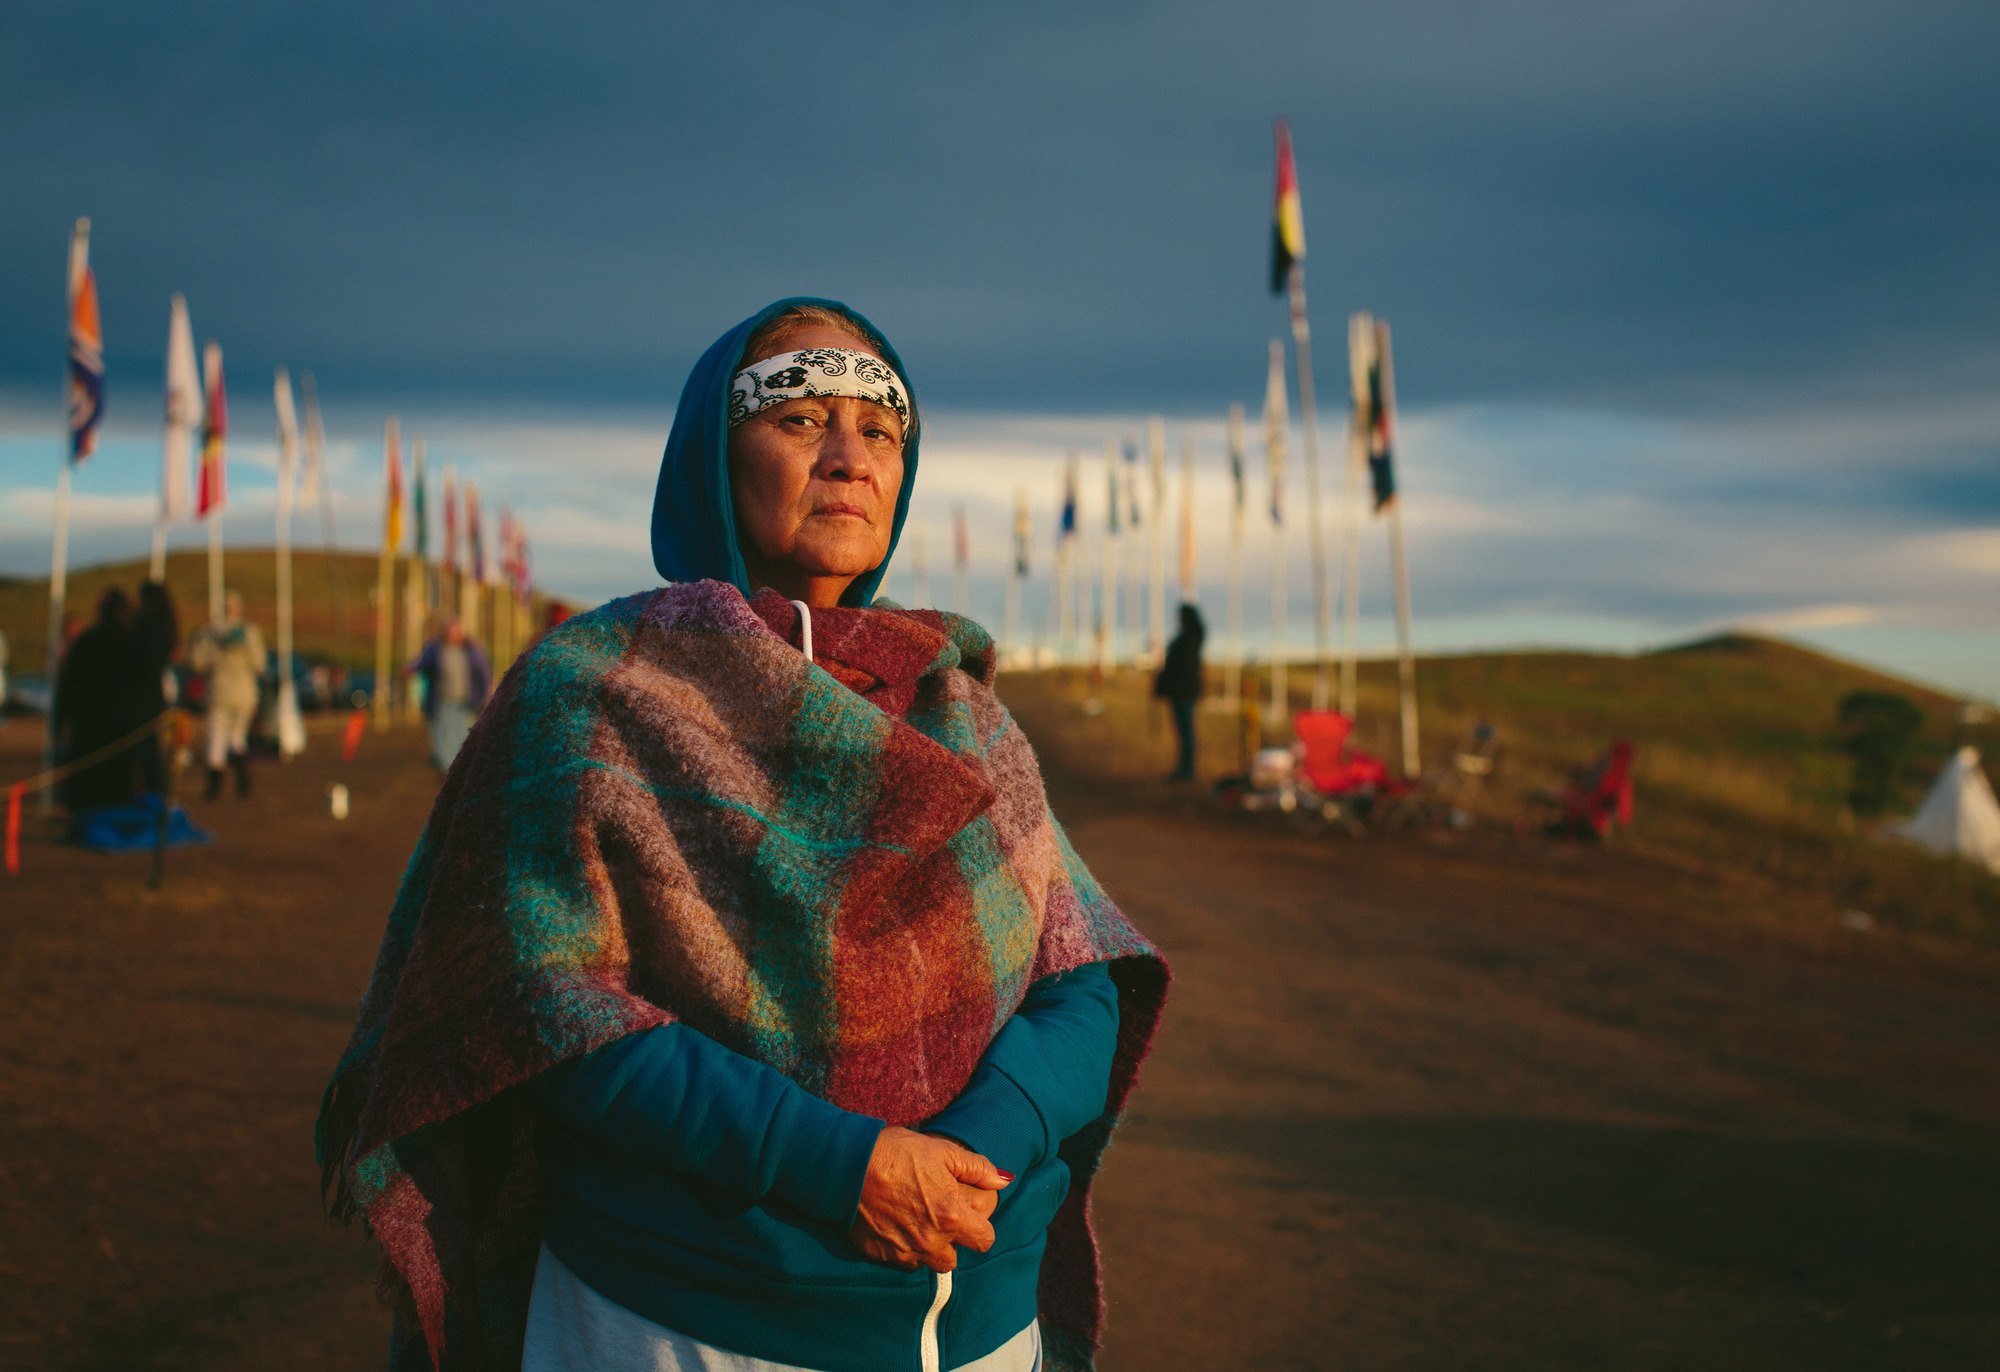 indigenous struggles, indigenous peoples, Native American protests, Standing Rock Sioux protests, Dakota Access Pipeline, Lakota Sioux, Great Sioux Nation, land sovereignty, Wounded Knee occupation, Berta Cáceres, 